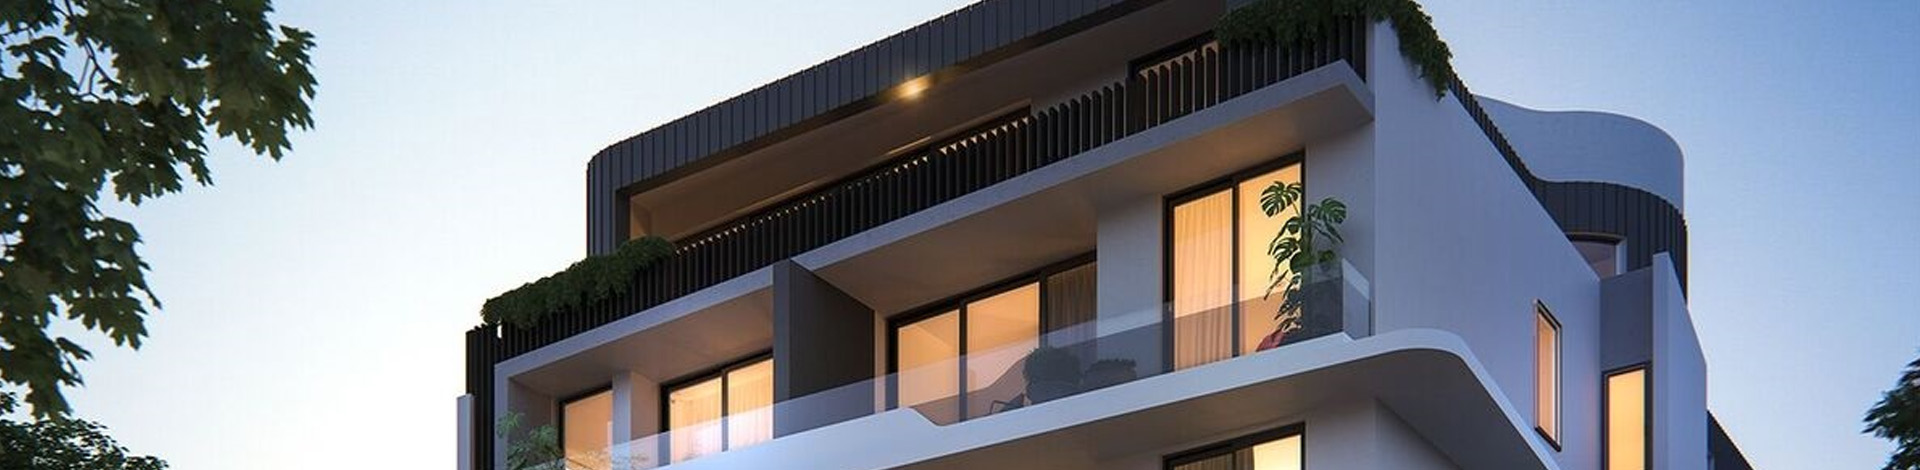 Reliable Construction Company Sydney | Luxury Residential Apartments